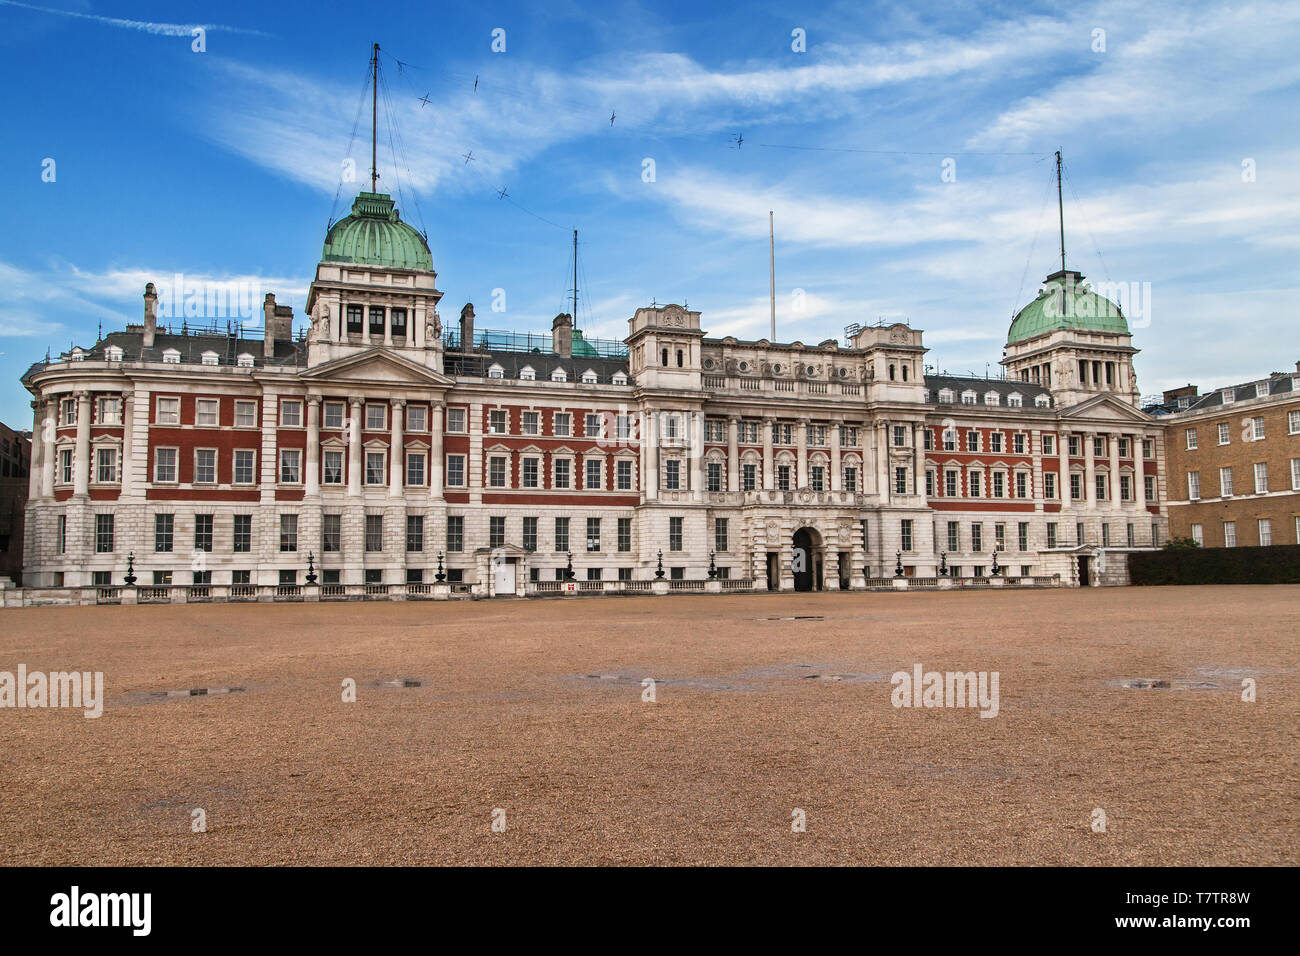 Old Admiralty Building in London, United Kingdom. Stock Photo